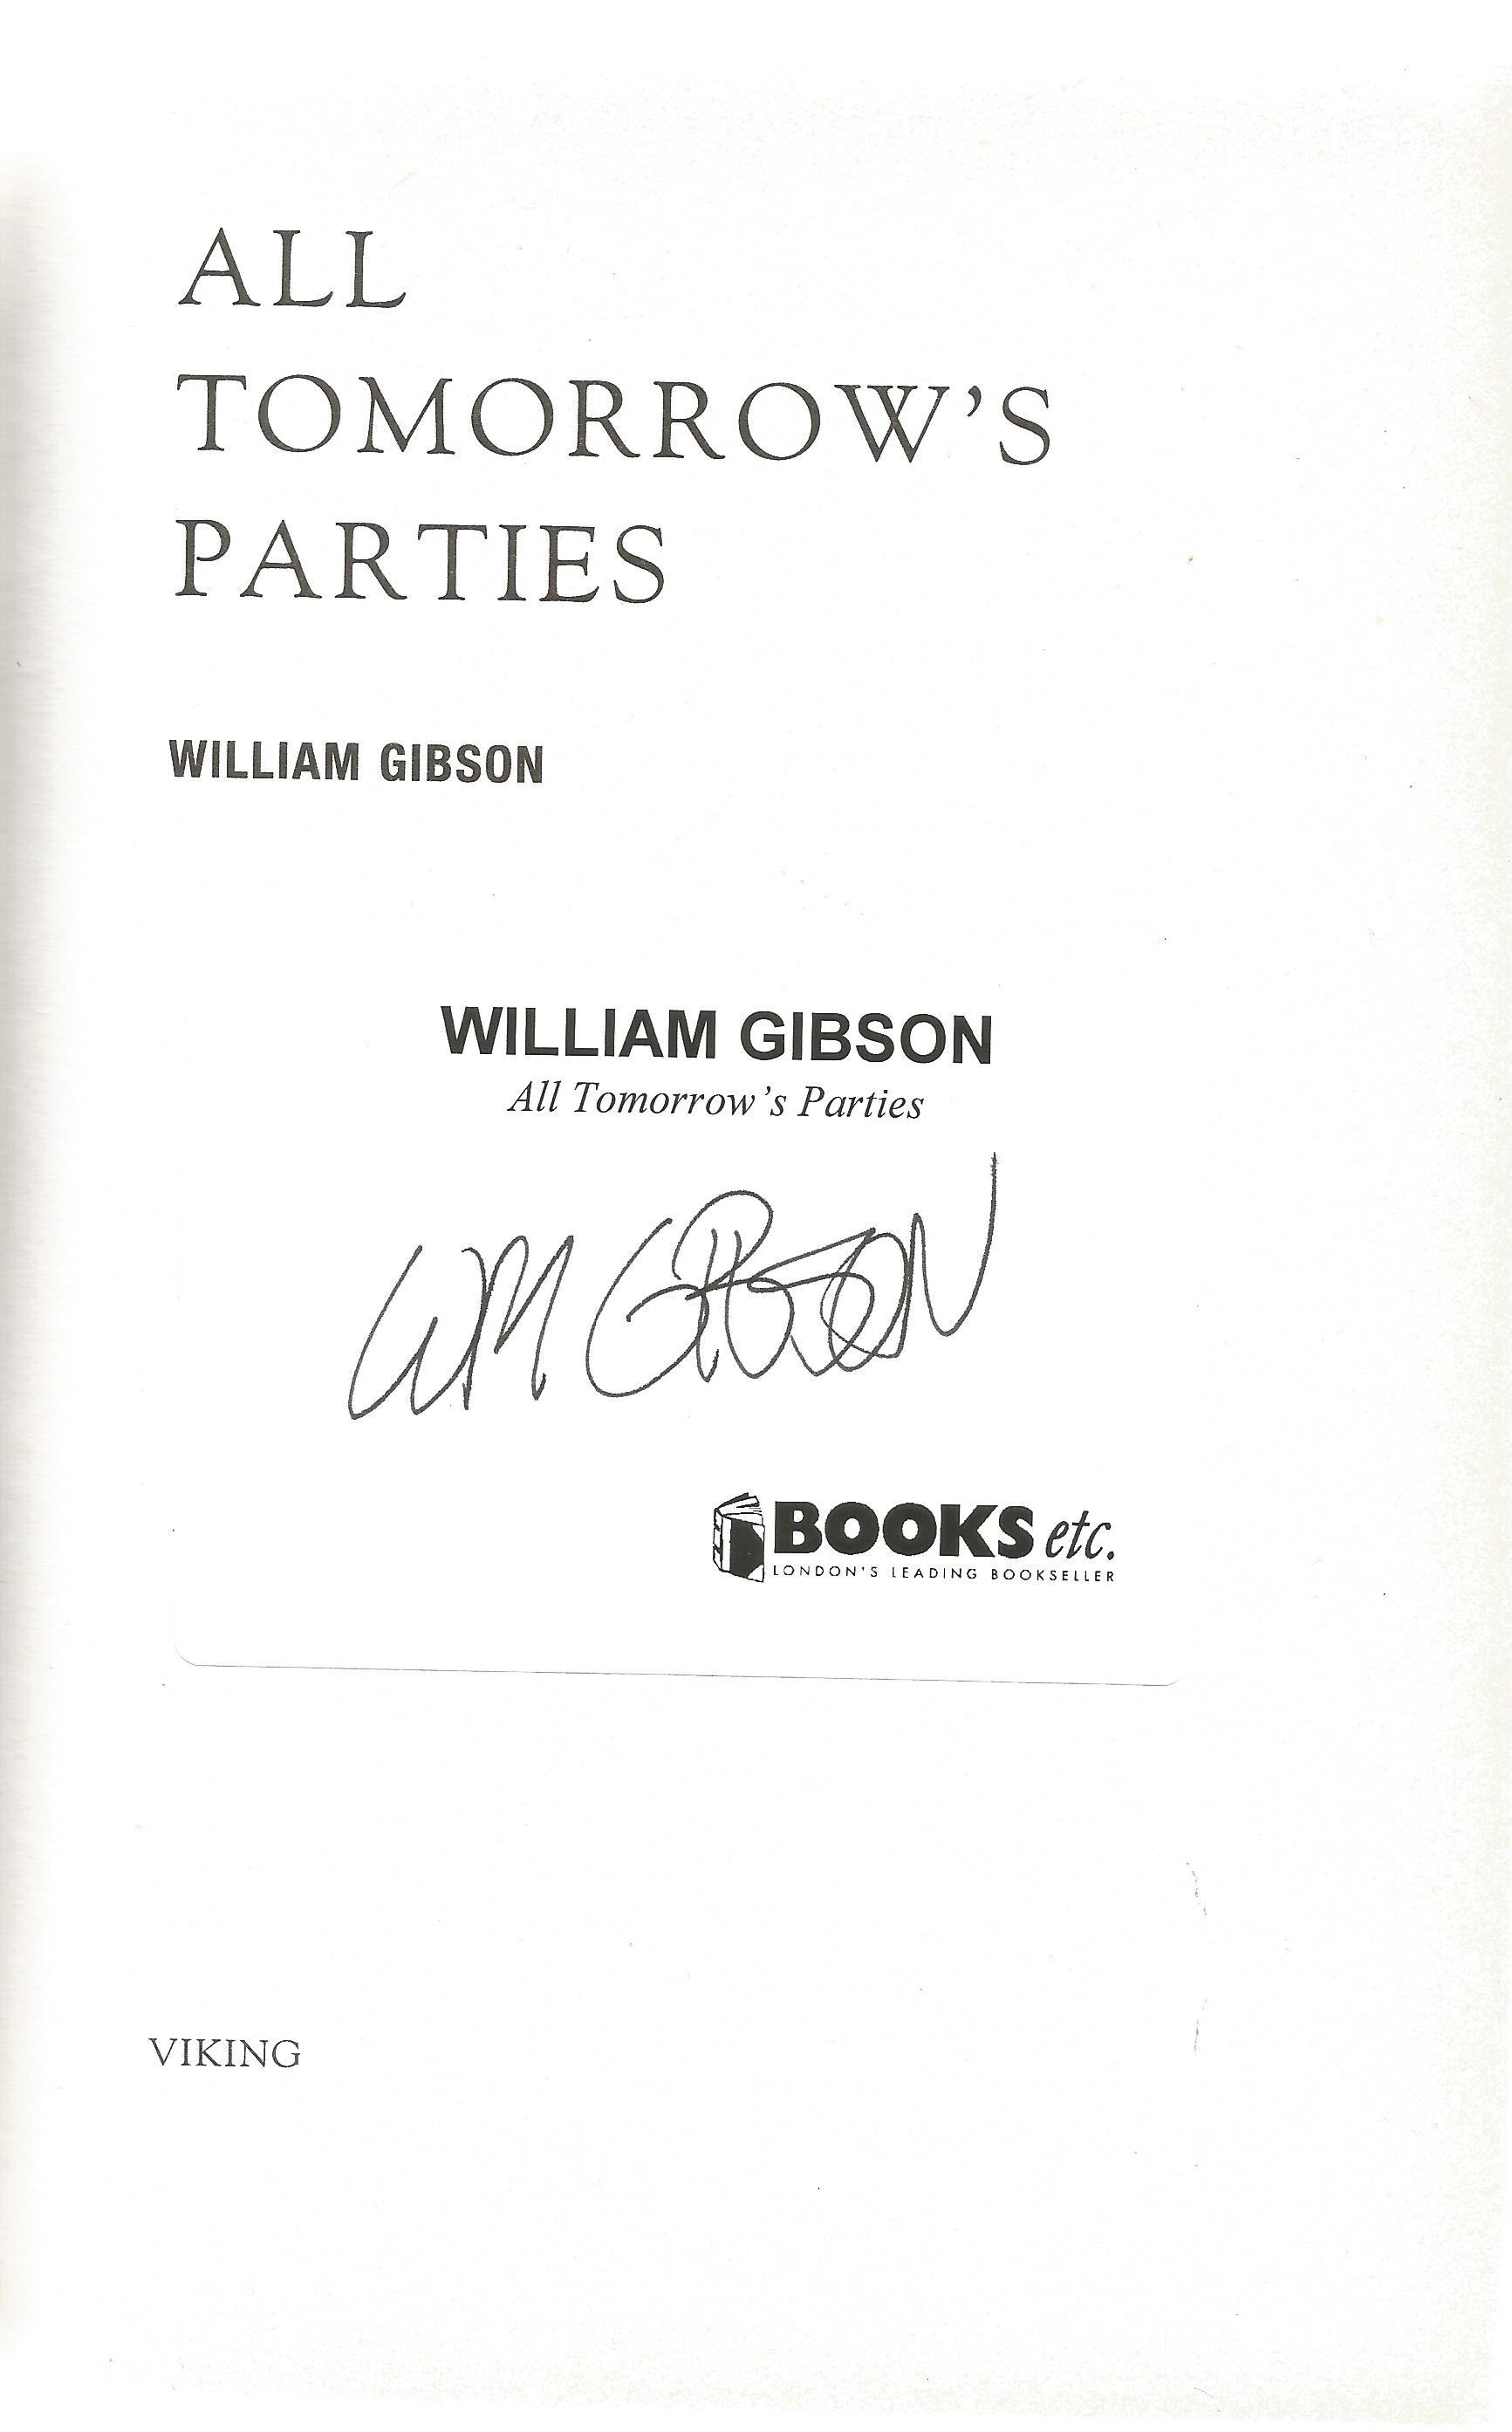 William Gibson Hardback Book All Tomorrow's Parties signed by the Author on the Title Page dust - Image 2 of 2